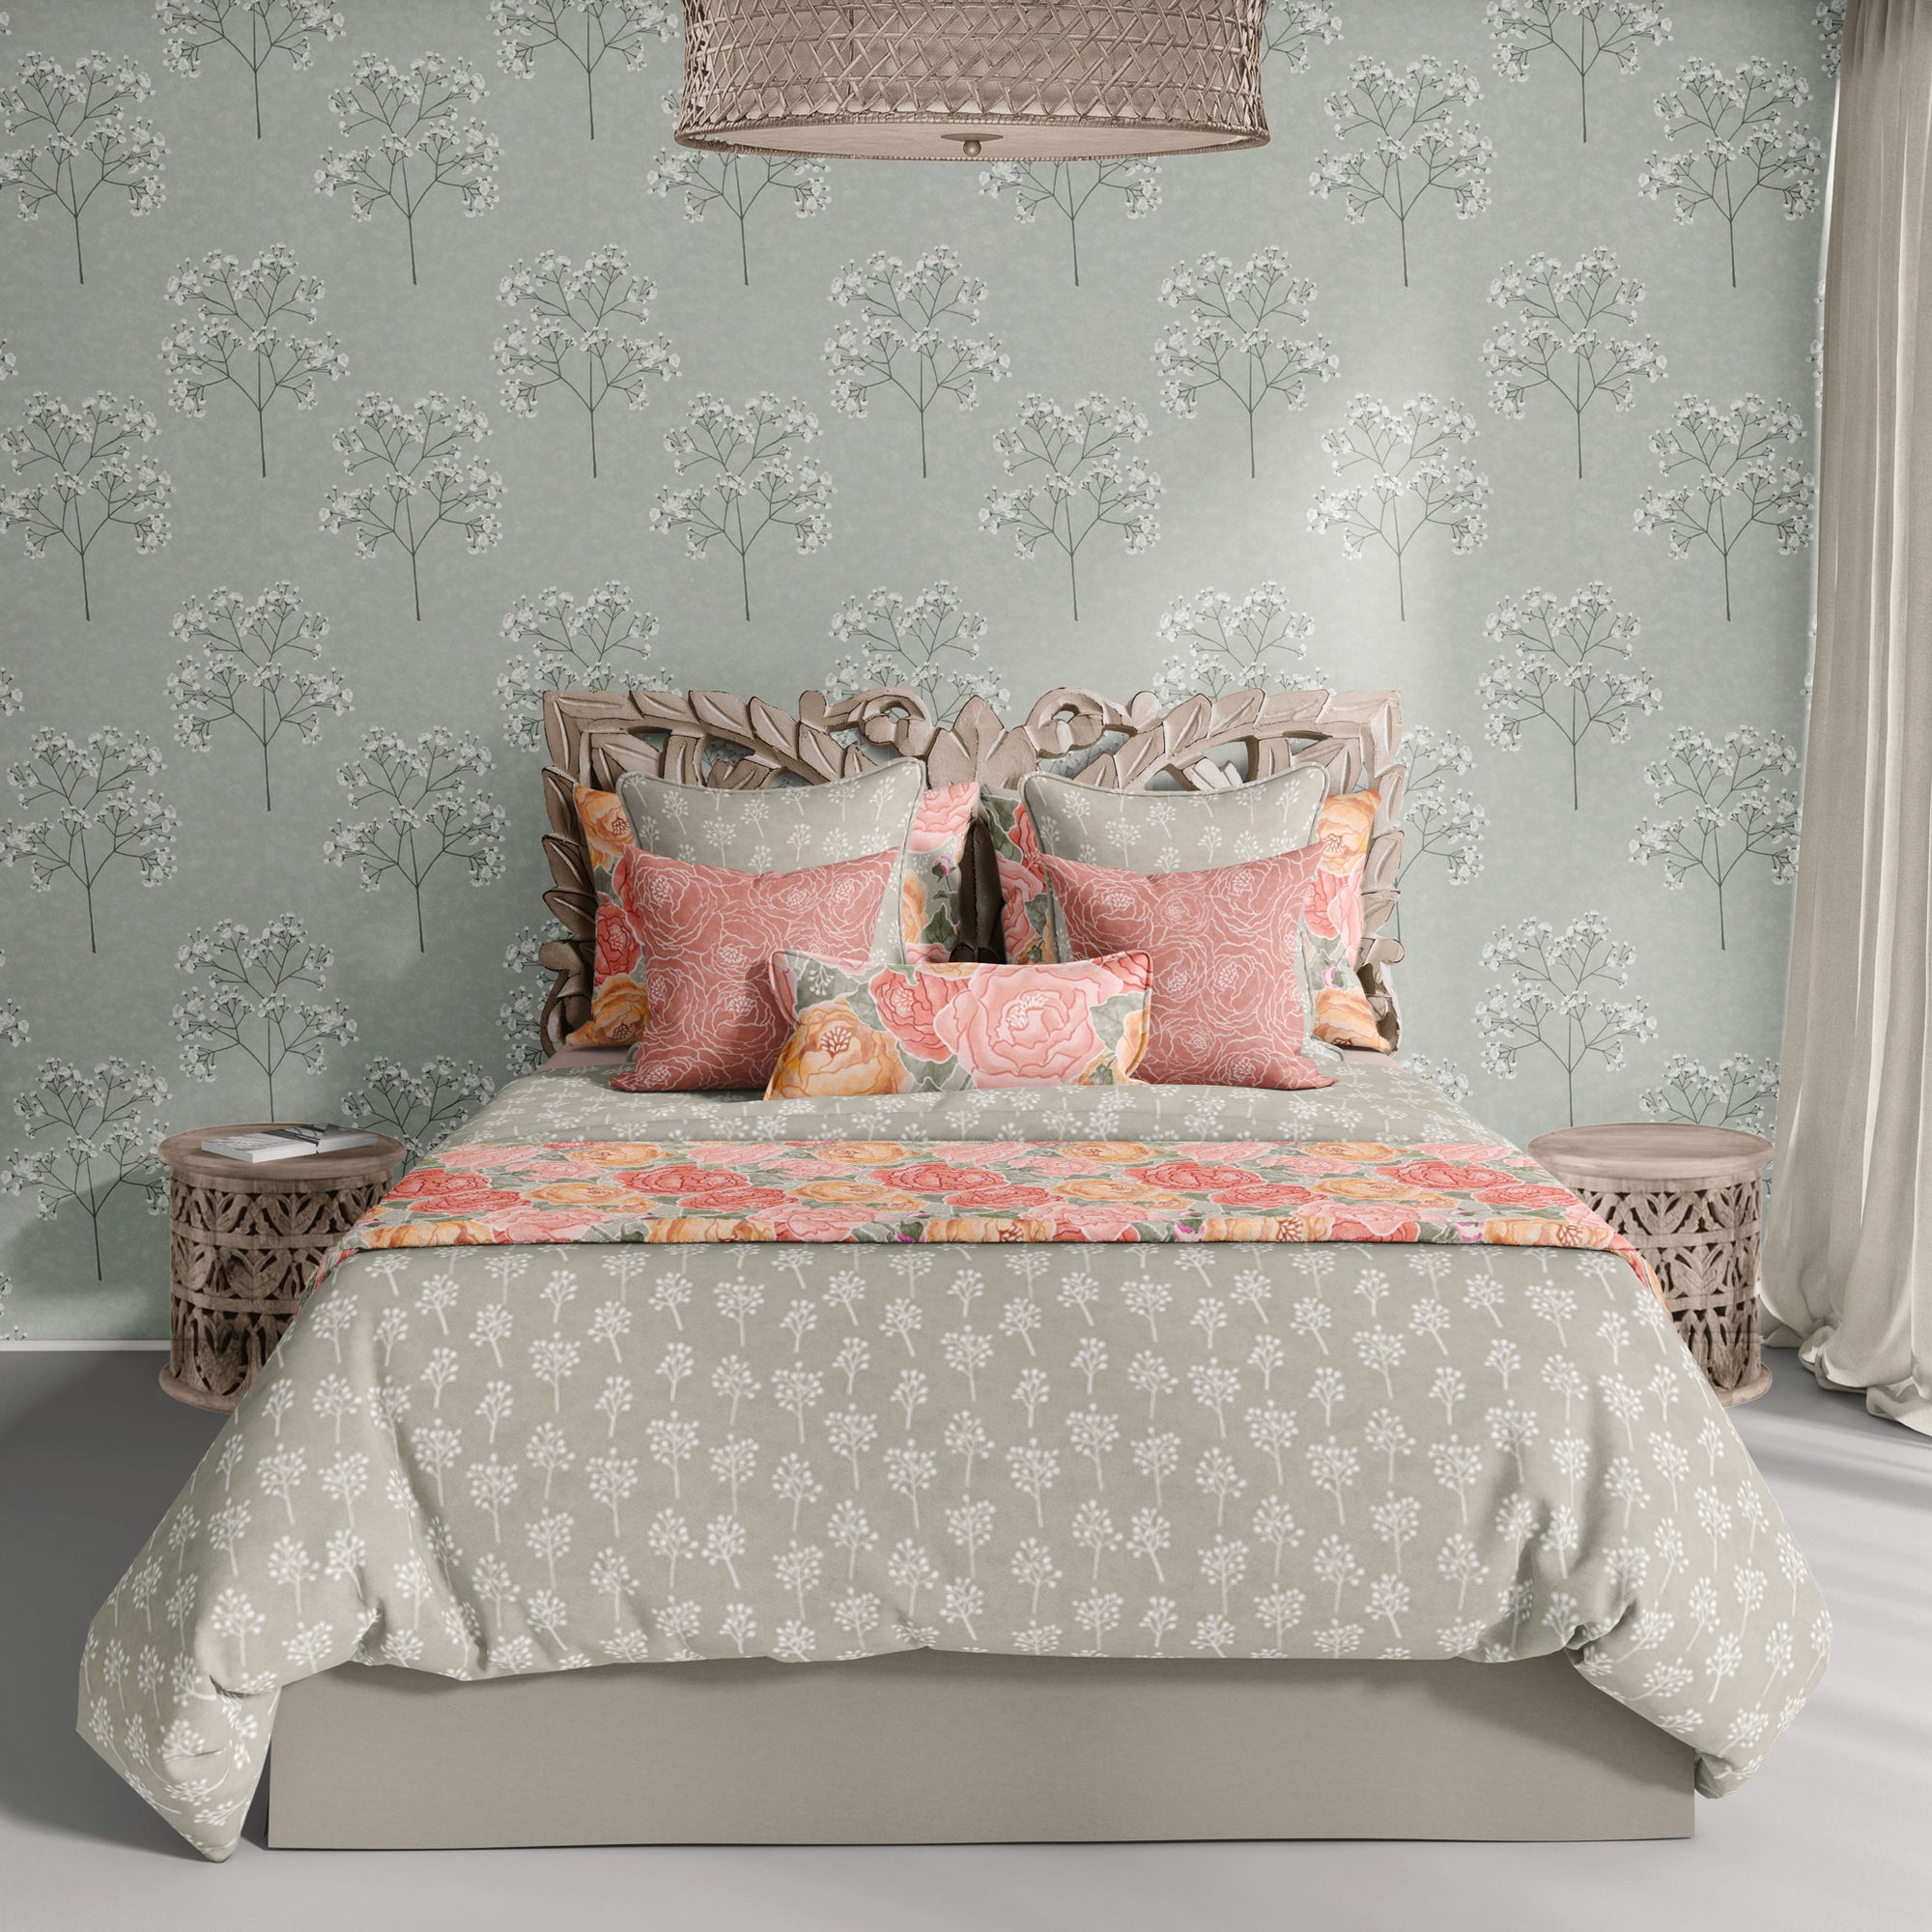 Pretty in Peony Baby’s Breath Sage Bedding Collection comes in Twin, Full/Queen, & King/Cal. King Sizes